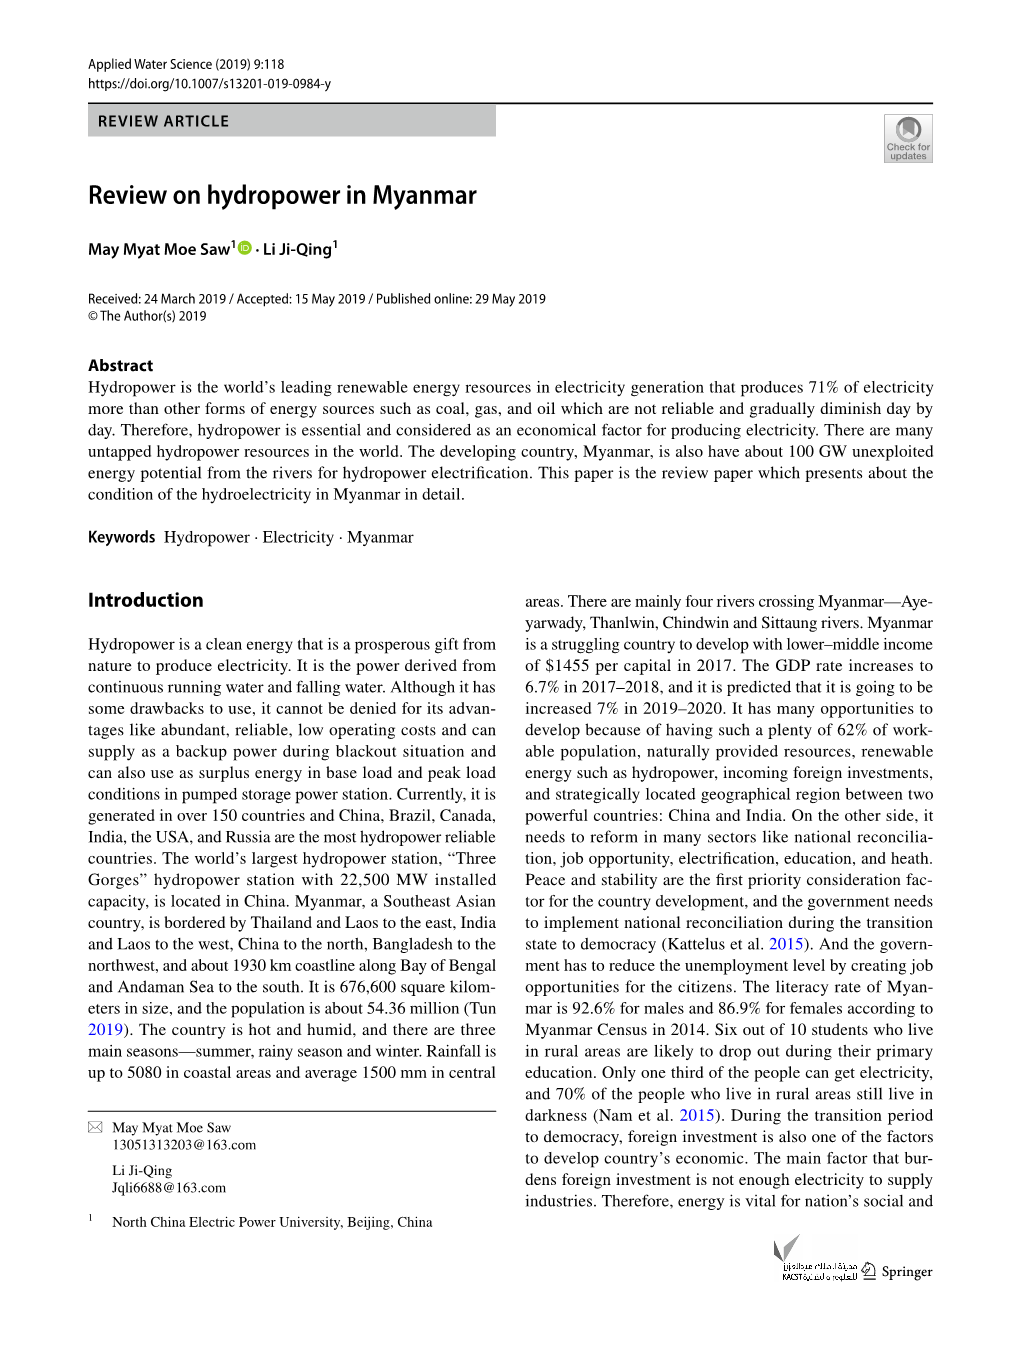 Review on Hydropower in Myanmar